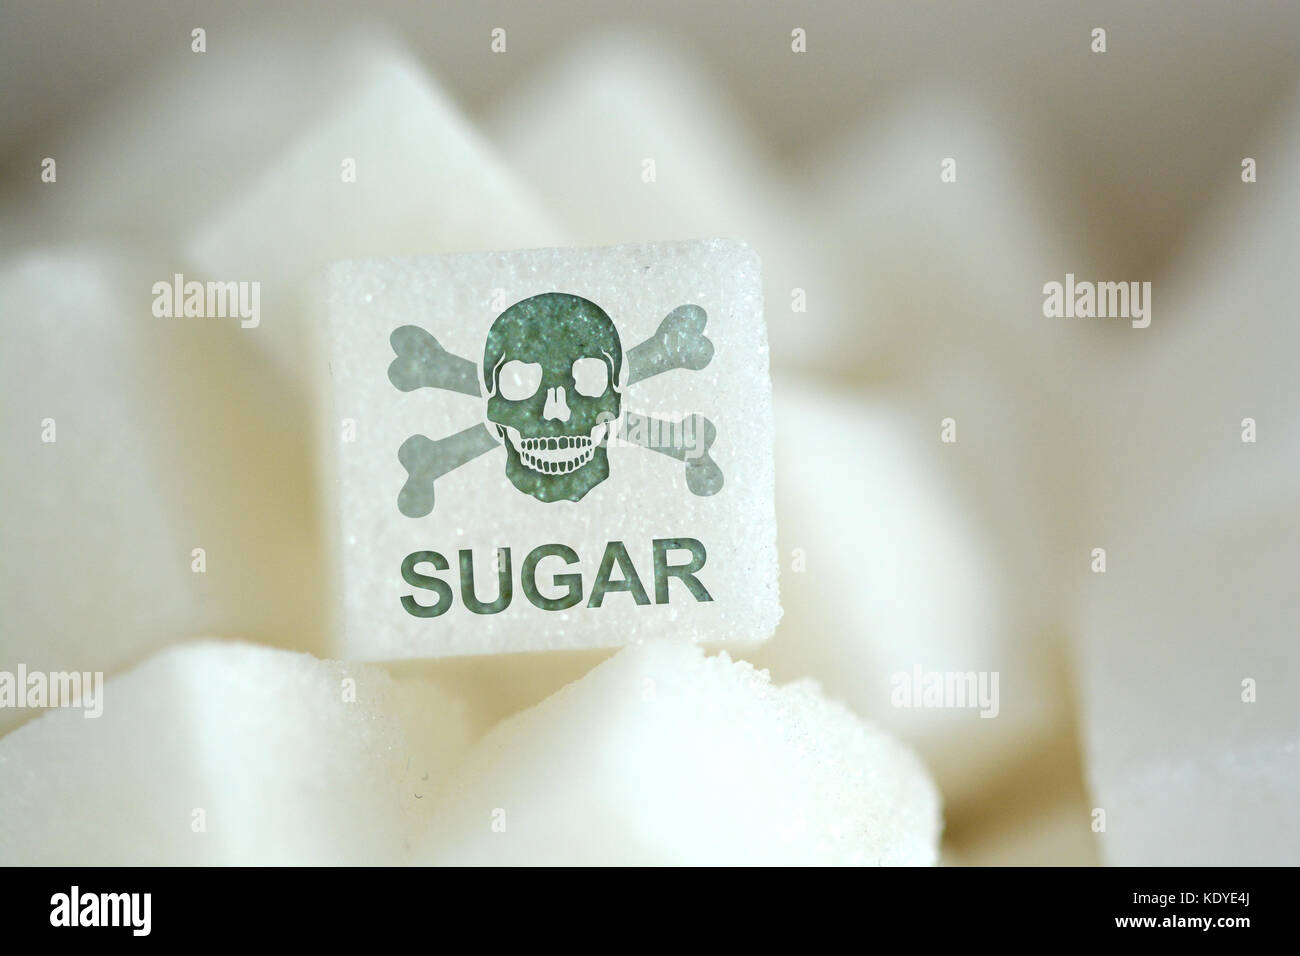 Sugar cubes with human skull symbol, suggesting unhealthy and dangerous food Stock Photo